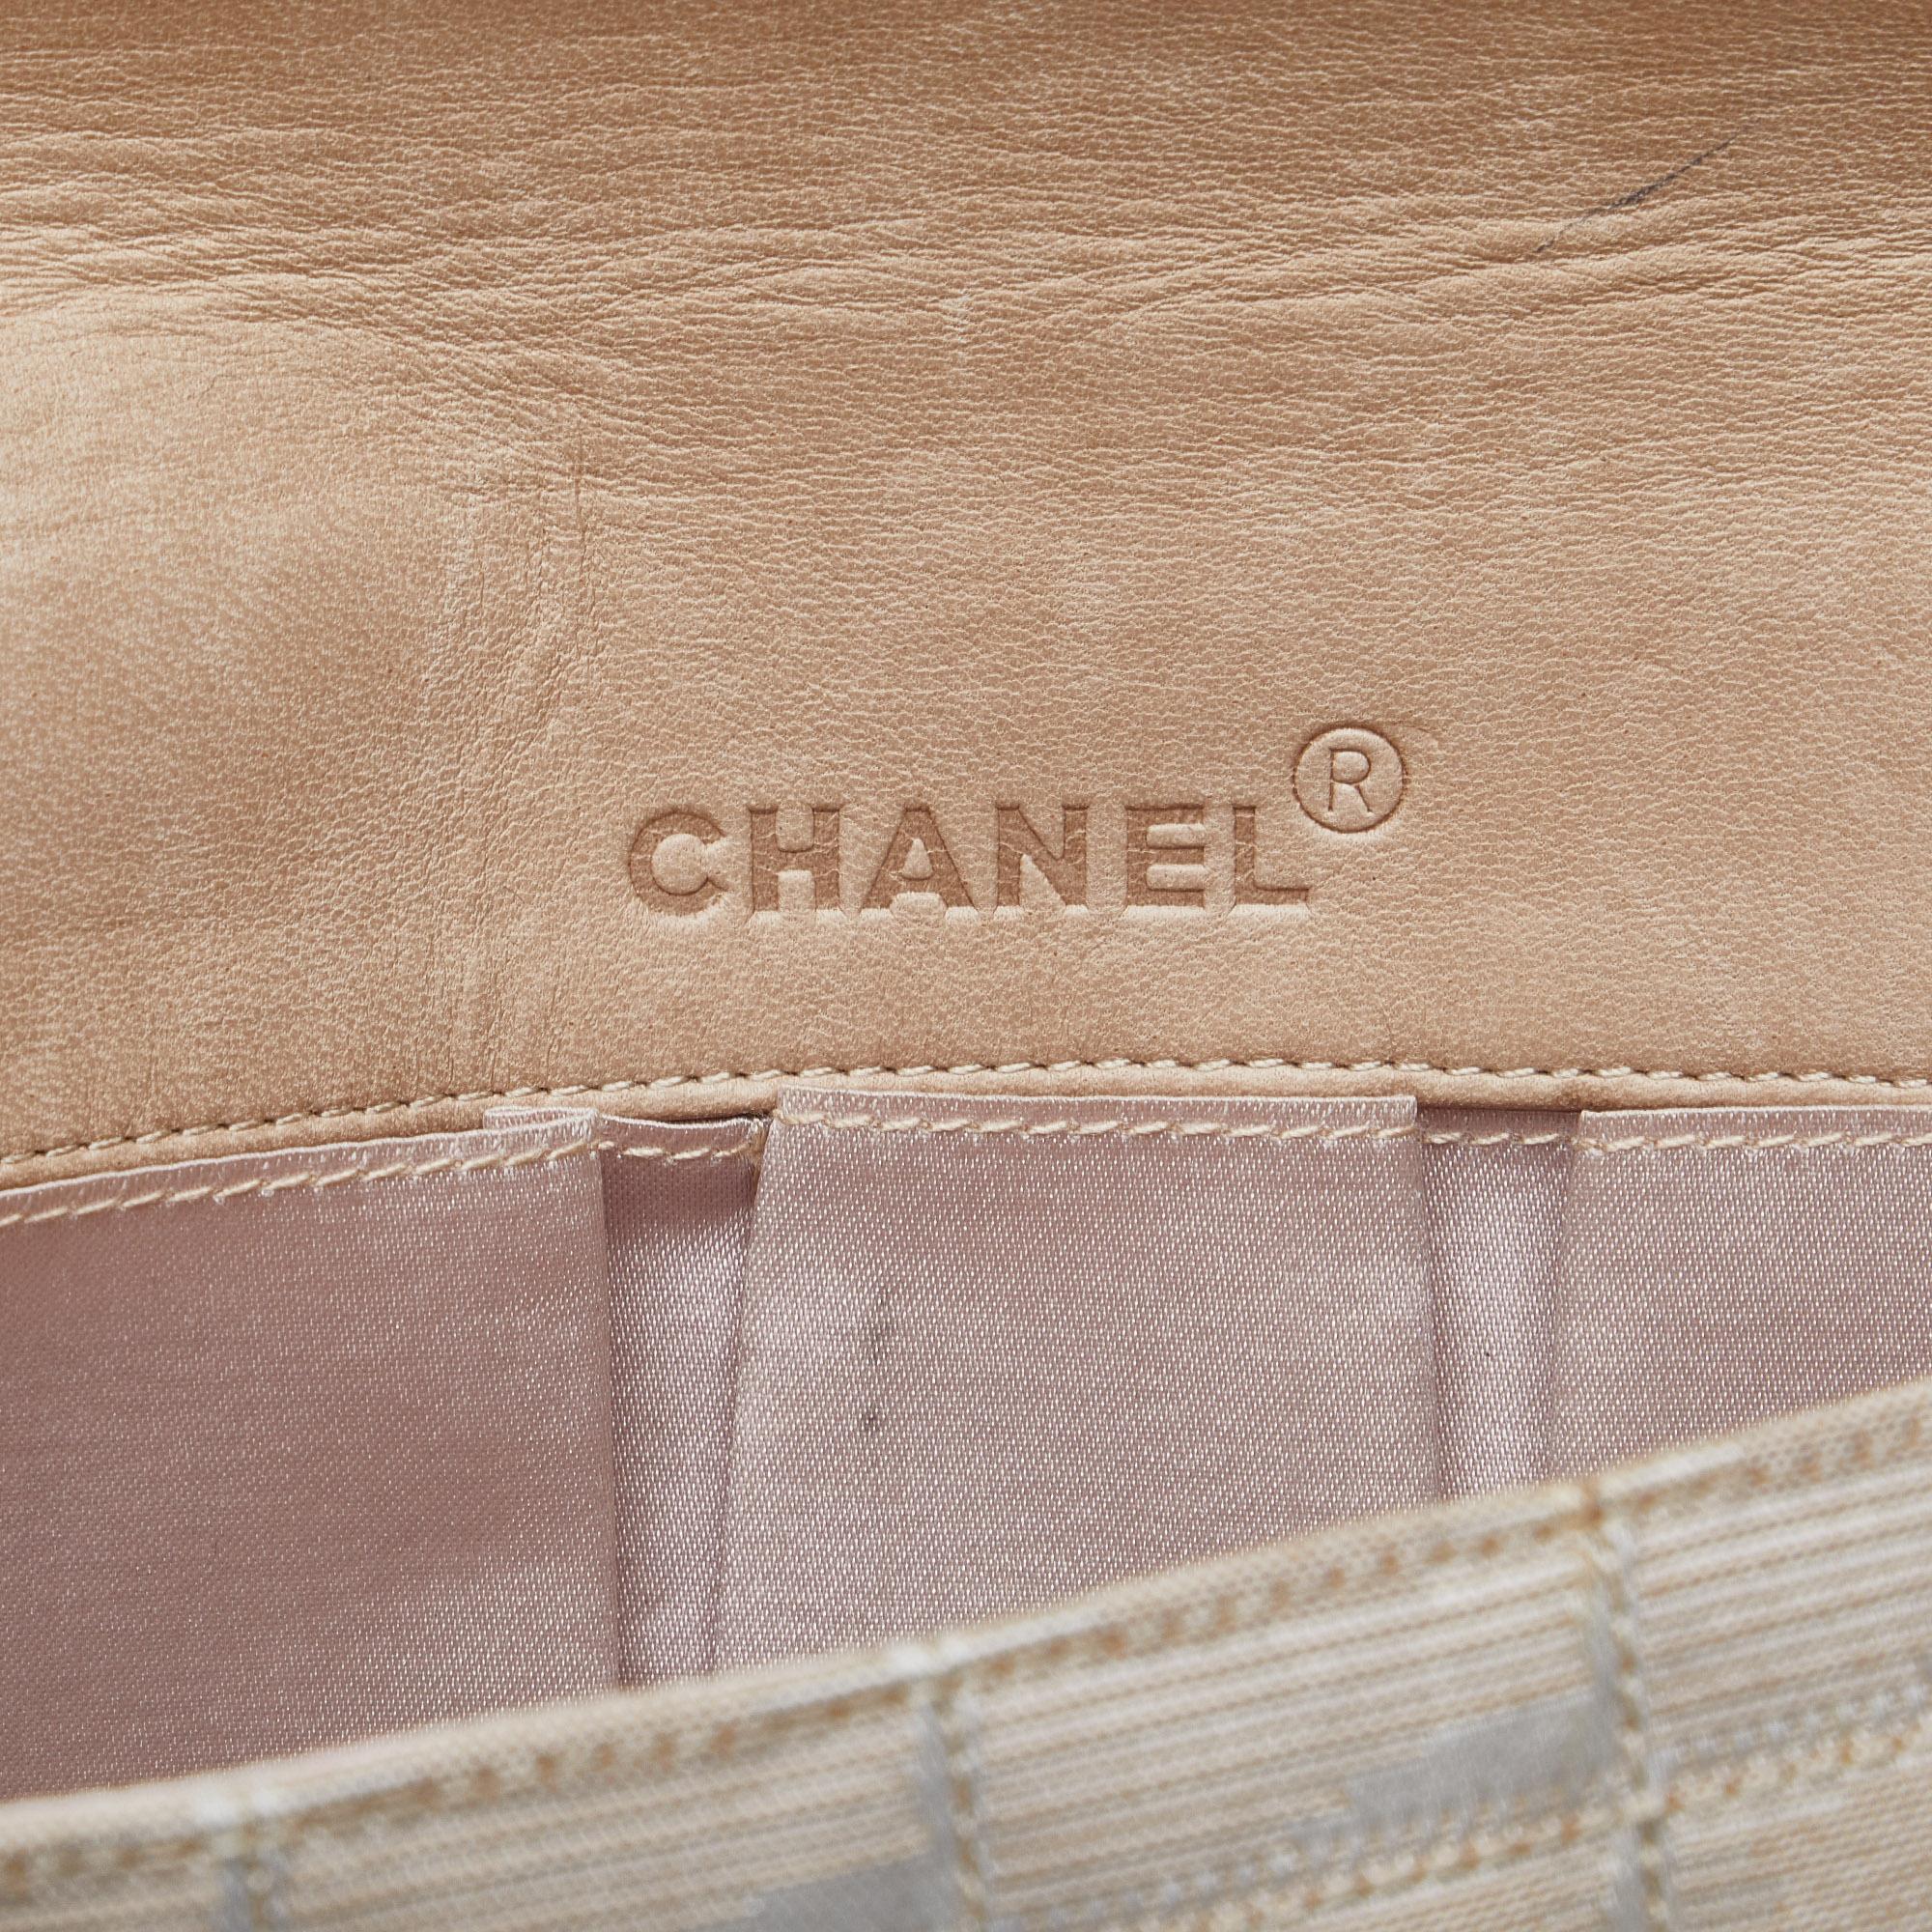 Chanel Beige New Travel Line East West Flap